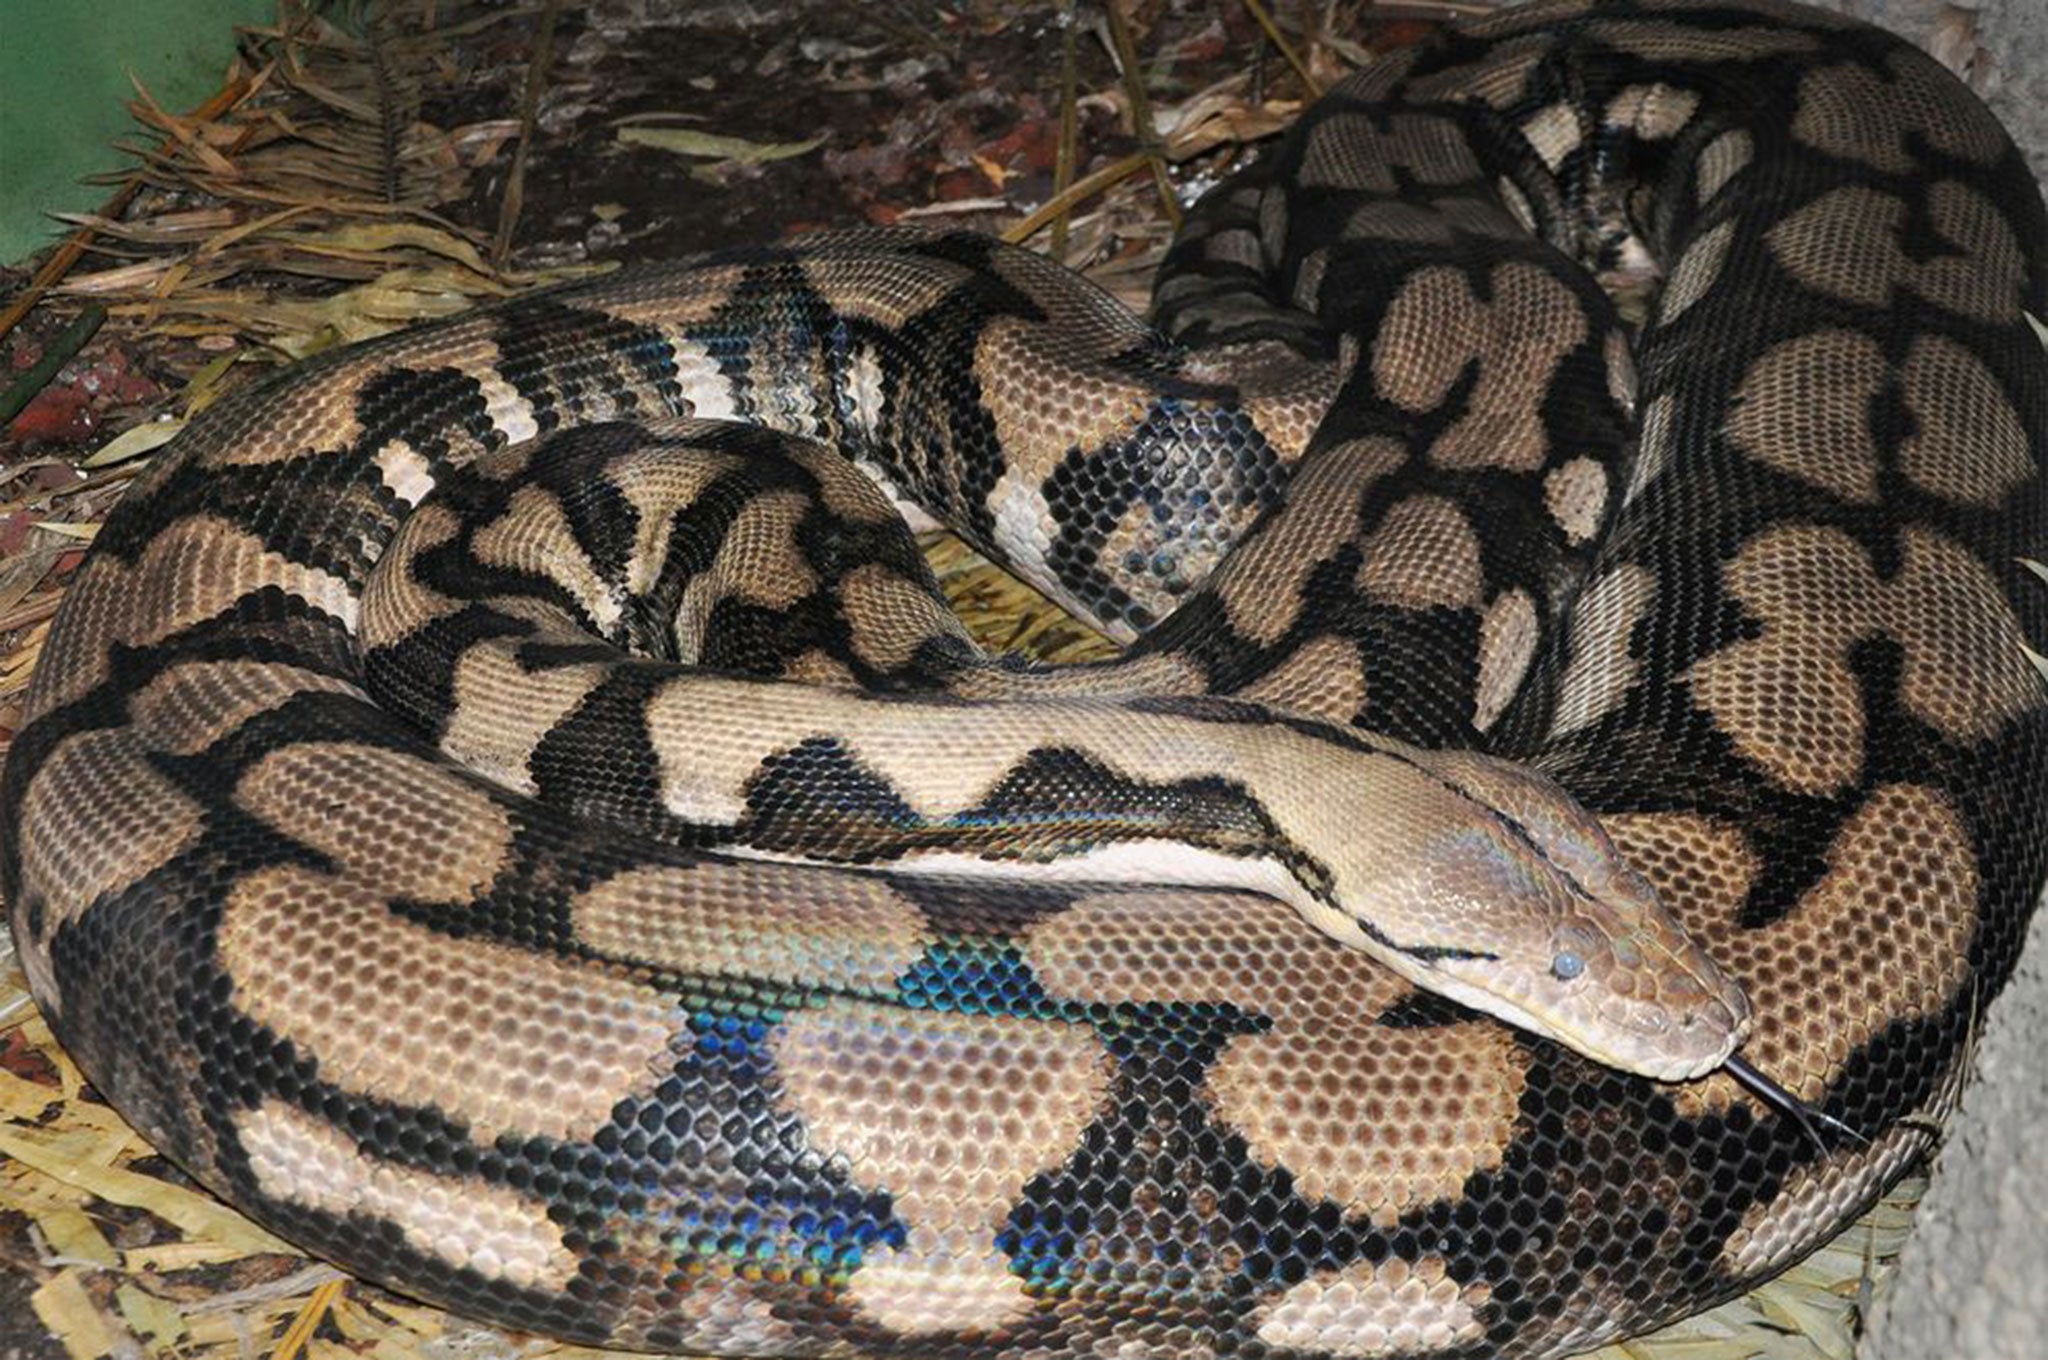 Reticulated python Thelma gave birth without contact with a male